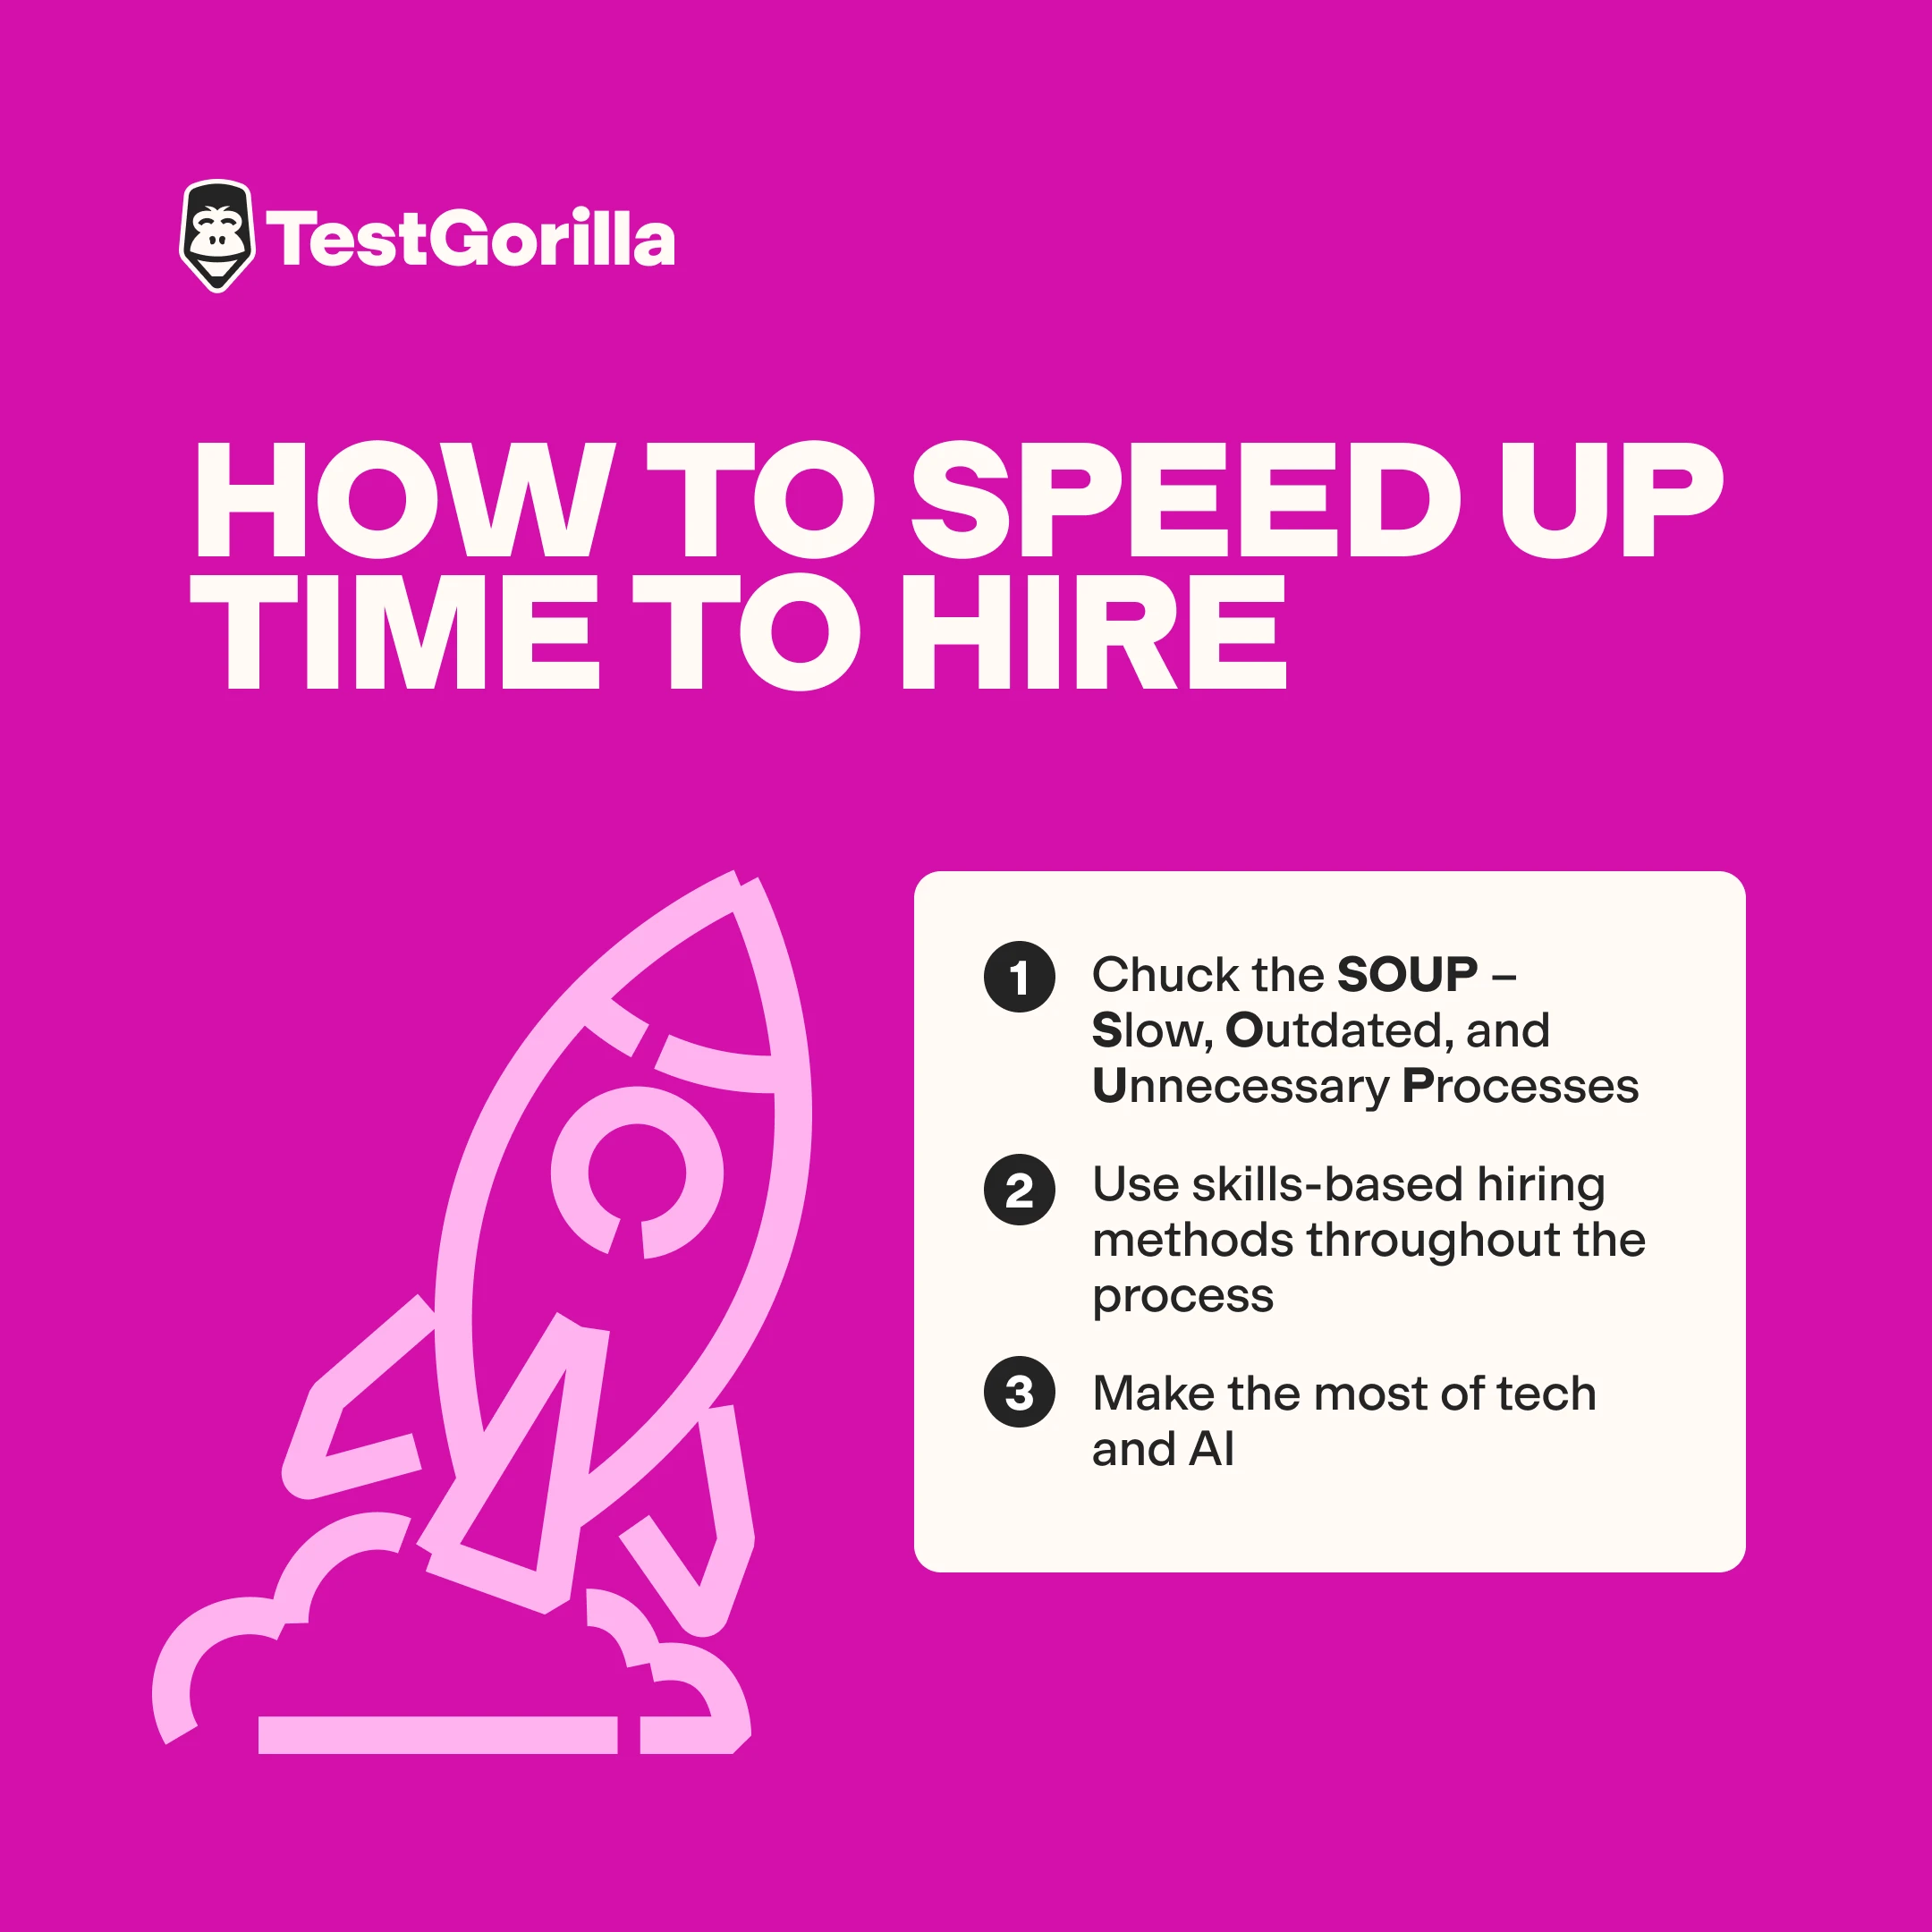 How to speed up time to hire